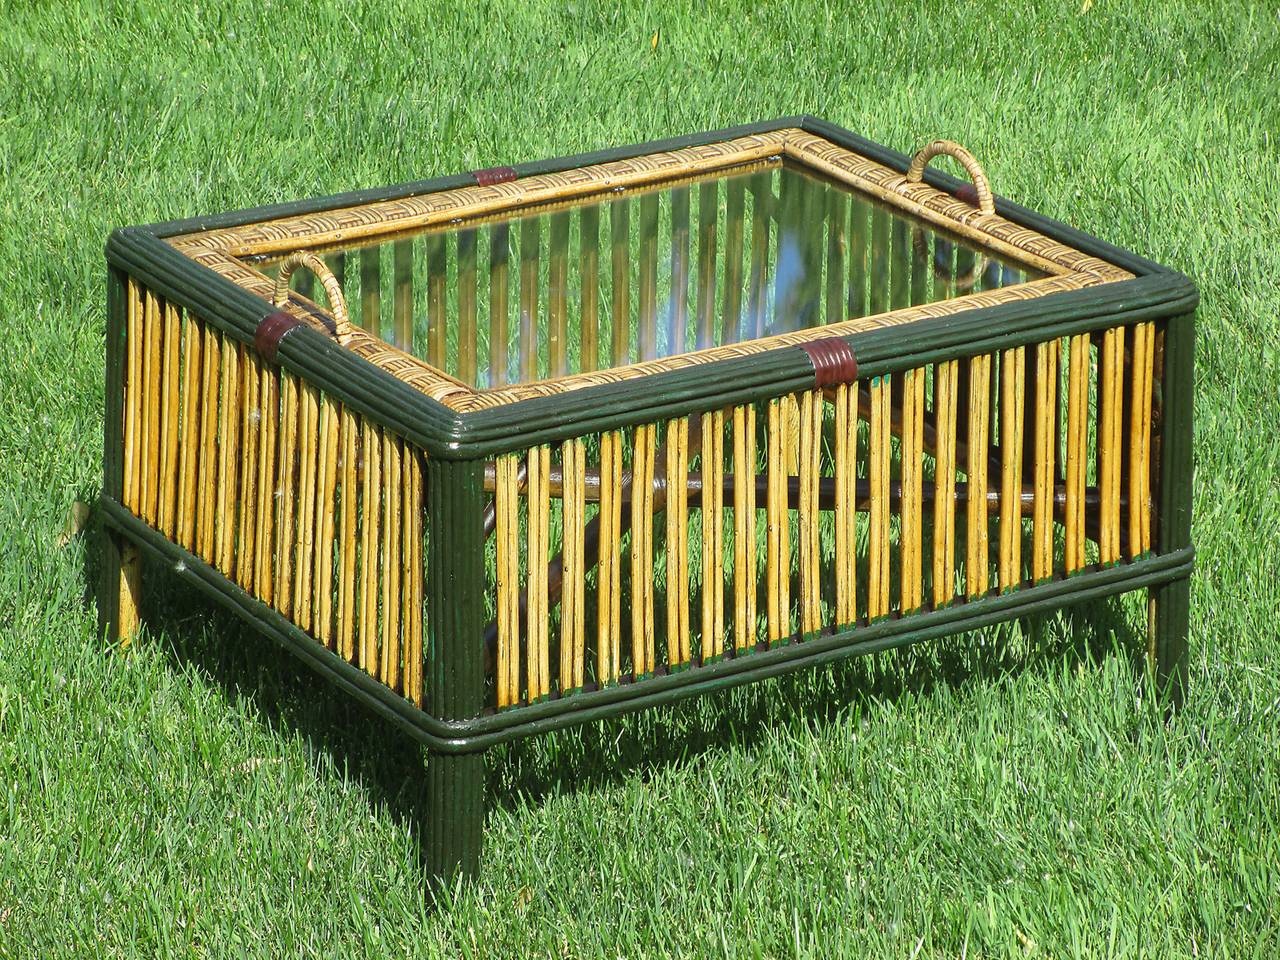 Unusual rectangular Stick Wicker coffee table with removable woven framed  glass tray.  Closely paired vertical reeds in a honey-toned finish bordered in dark green painted trim with burgundy colored decorative cane-wrappings.  Tray is removable for